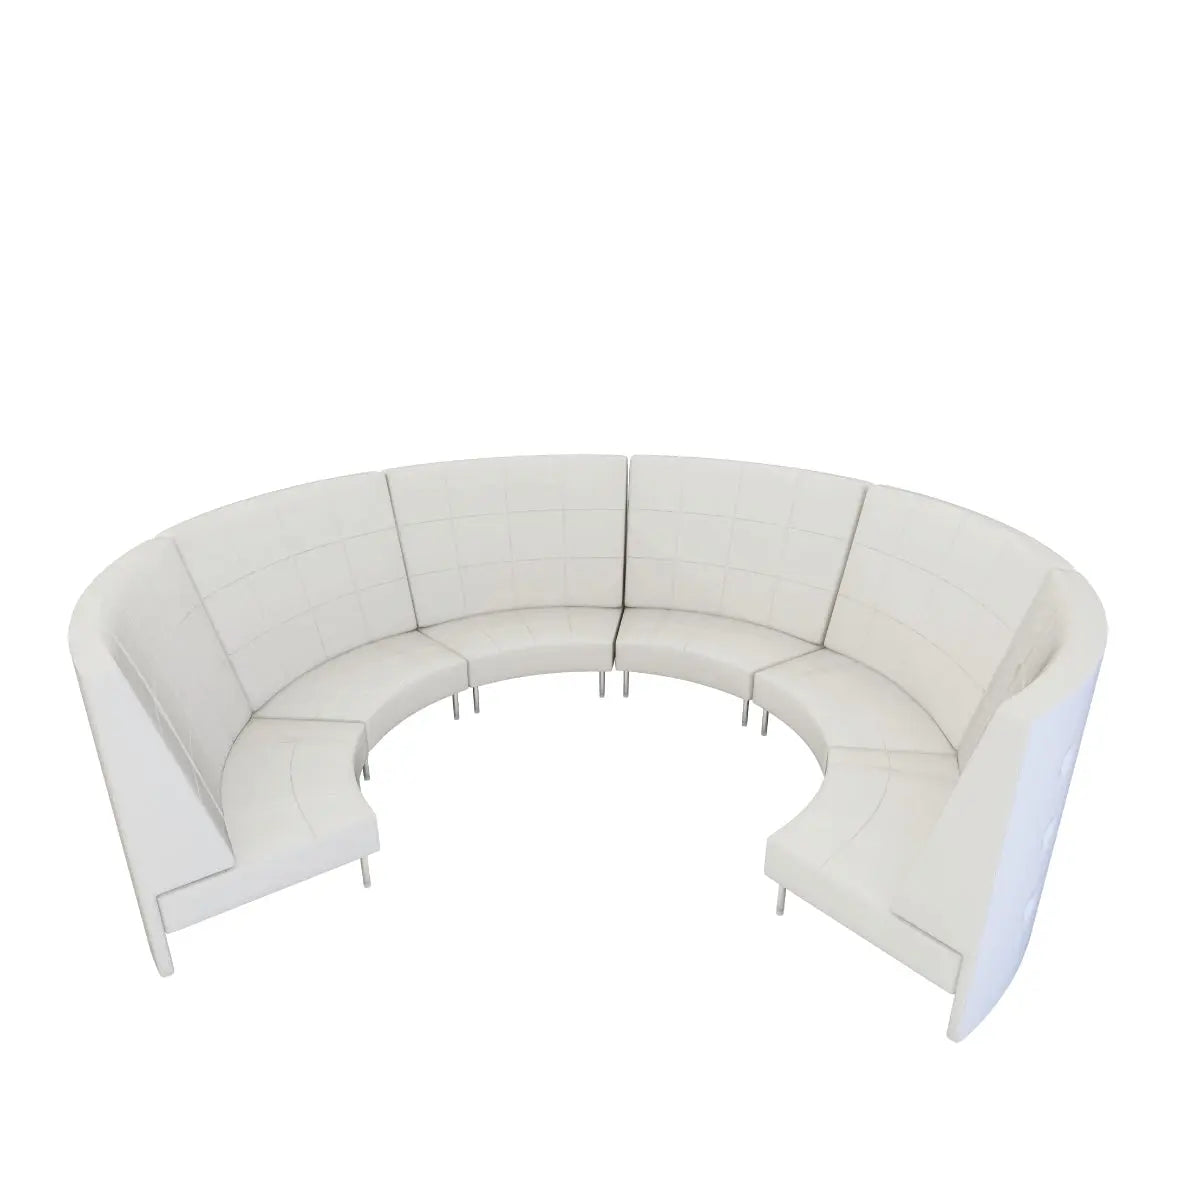 Endless 12 seater curved 3/4 circle sofa with large high back Desert River Rentals